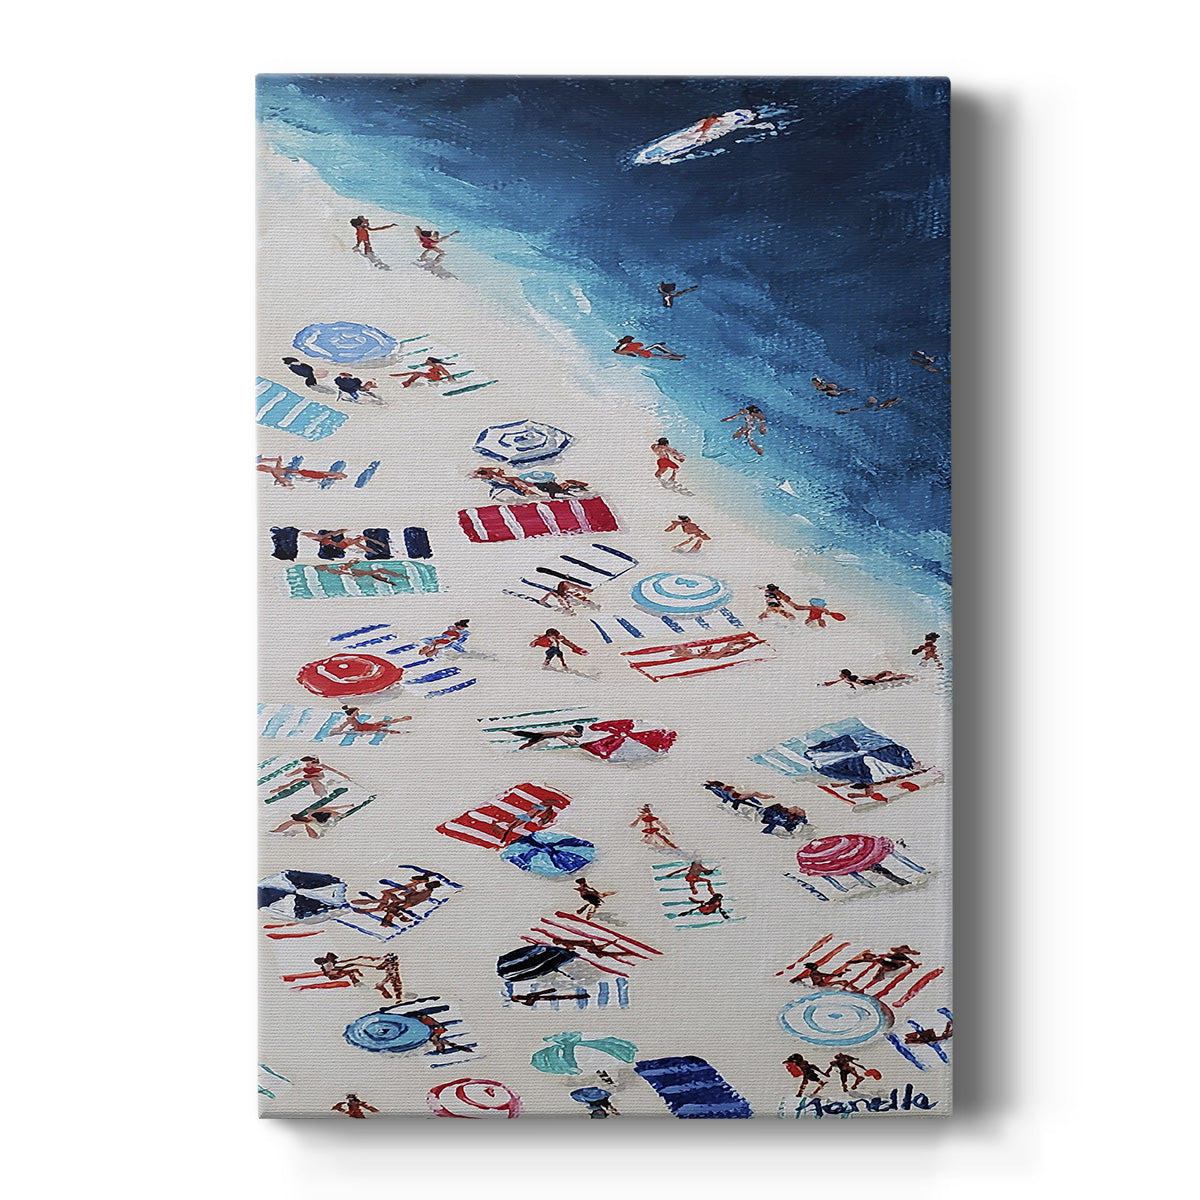 Break out Beach Premium Gallery Wrapped Canvas - Ready to Hang